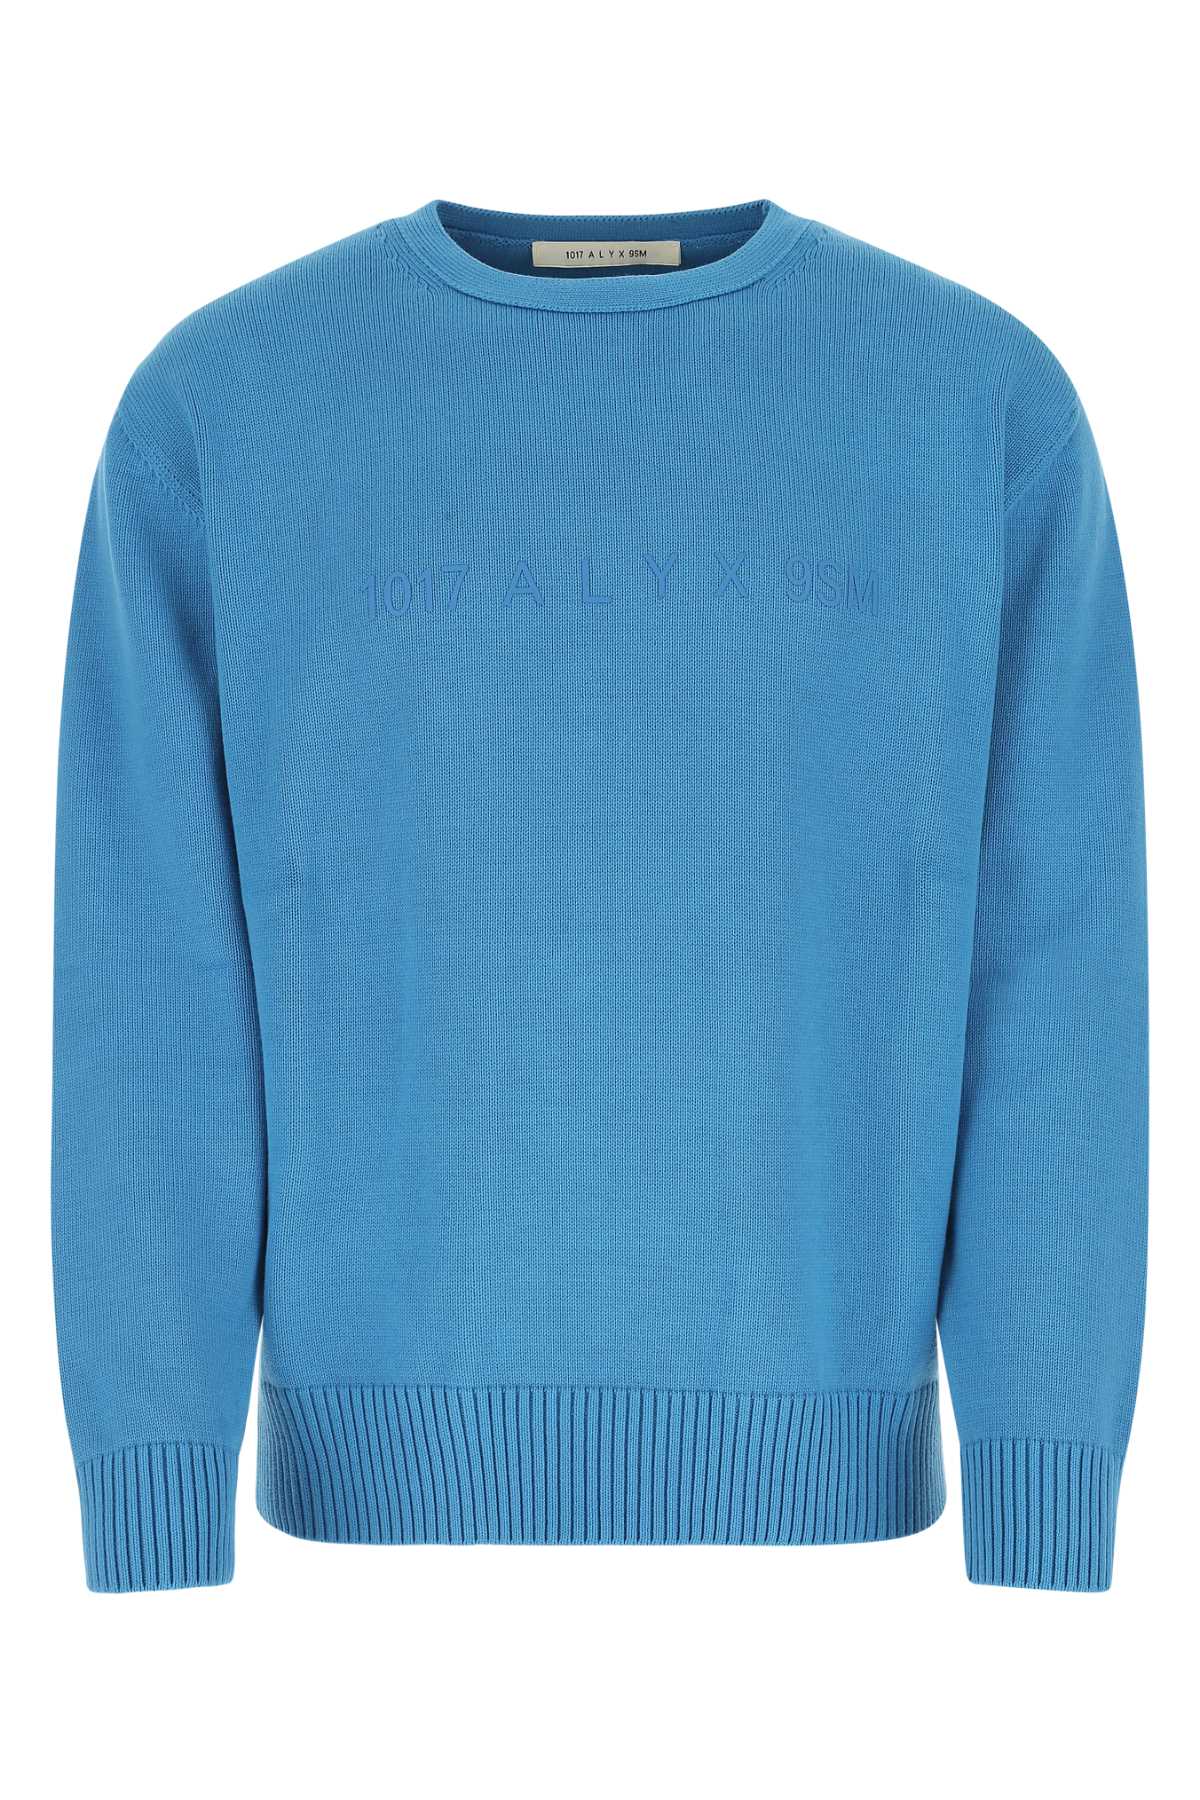 Shop Alyx Turquoise Cotton Sweater In Blu0001